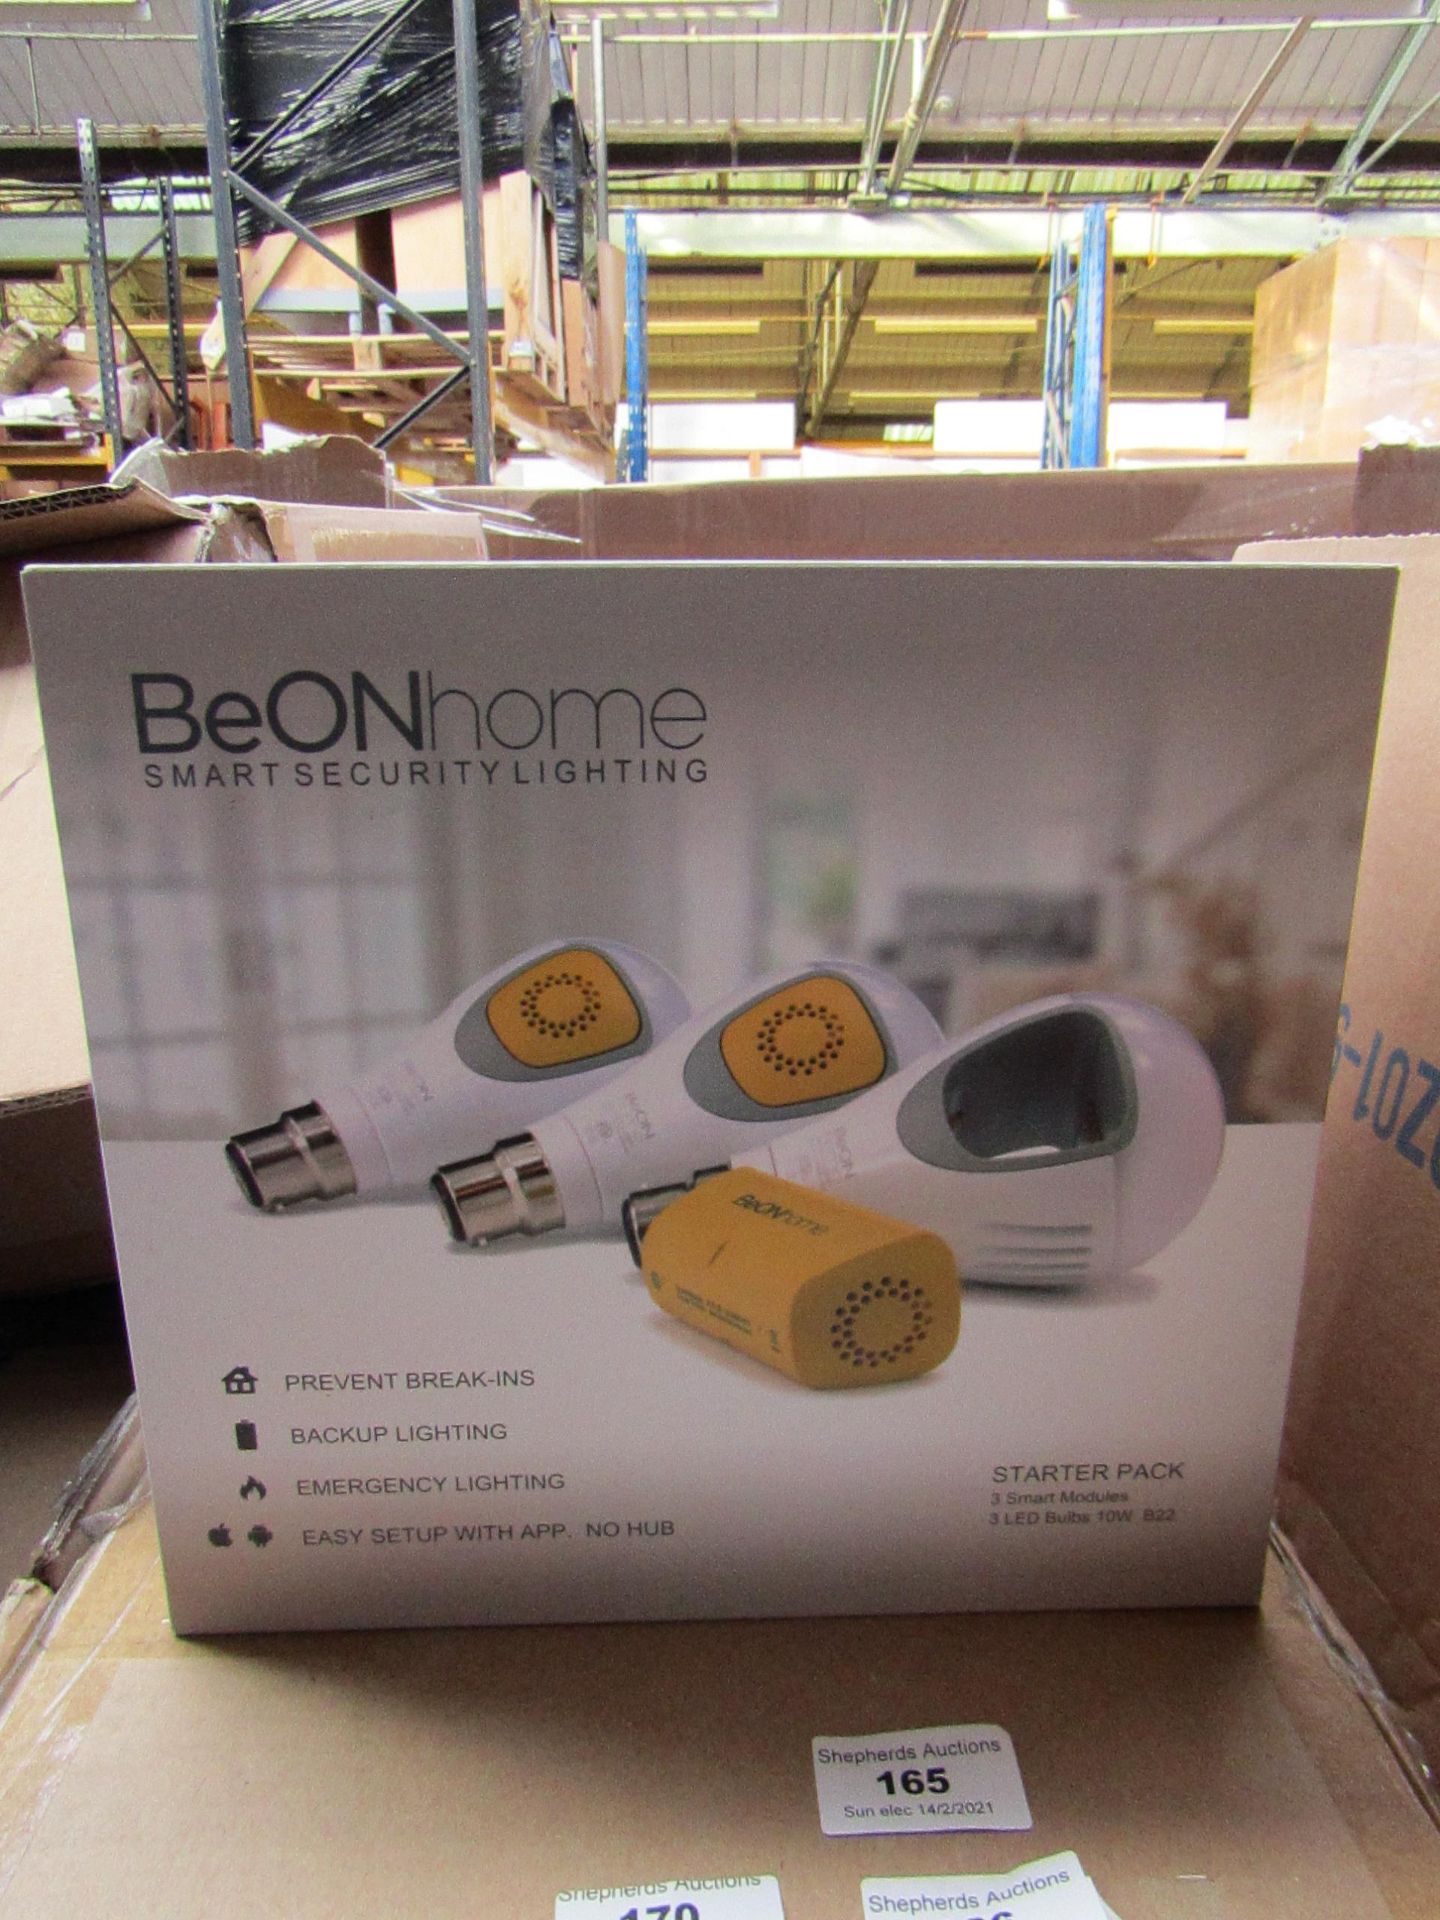 Be Onhome Smart Security lighting starter pack, new and boxed.